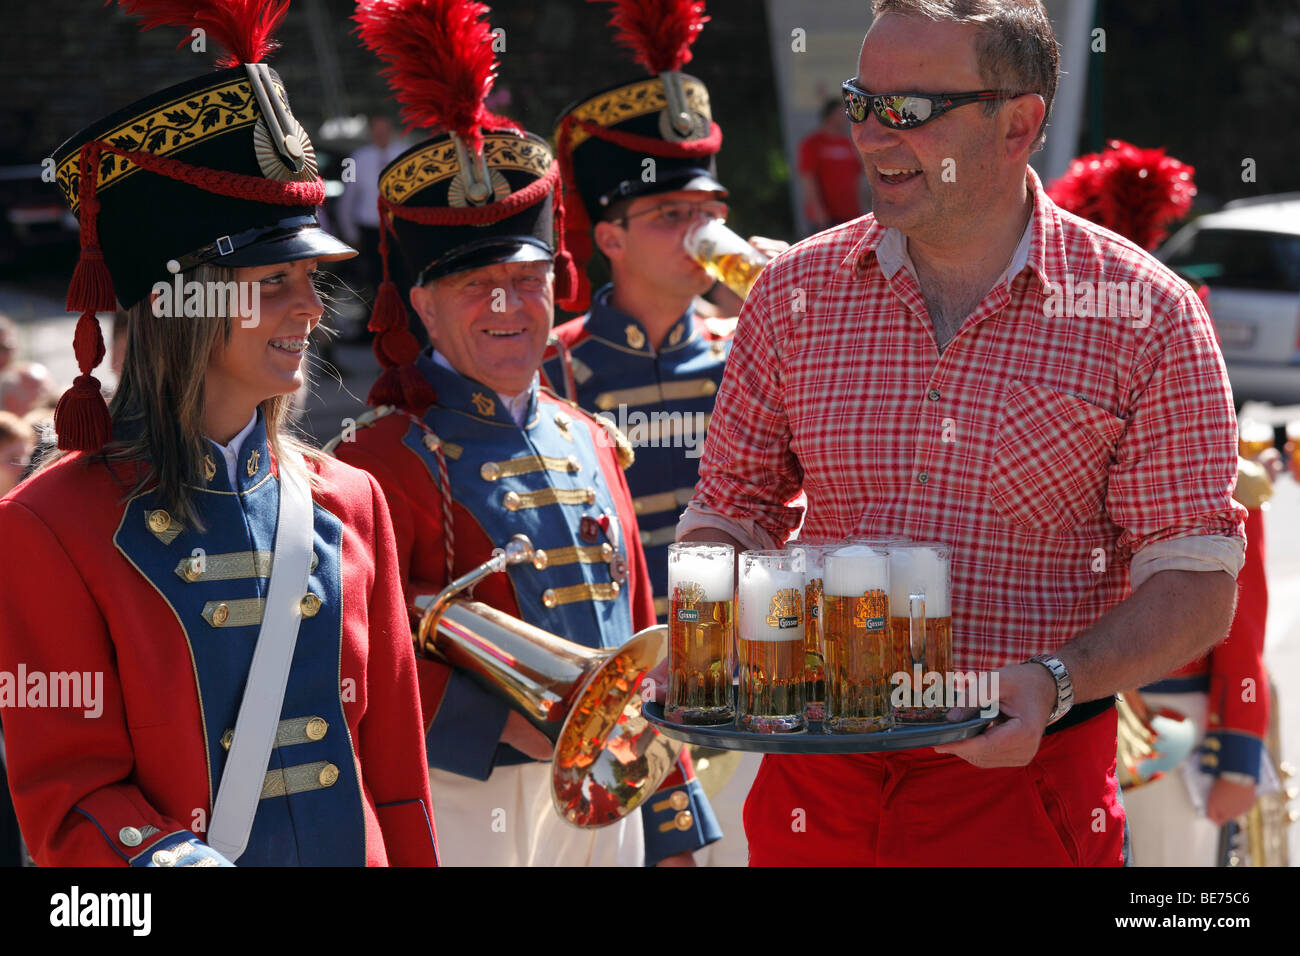 Landlord serving beer to the local music group from St Michael, at the Samson Parade, Katschberg, Lungau, Salzburg state, Salzb Stock Photo